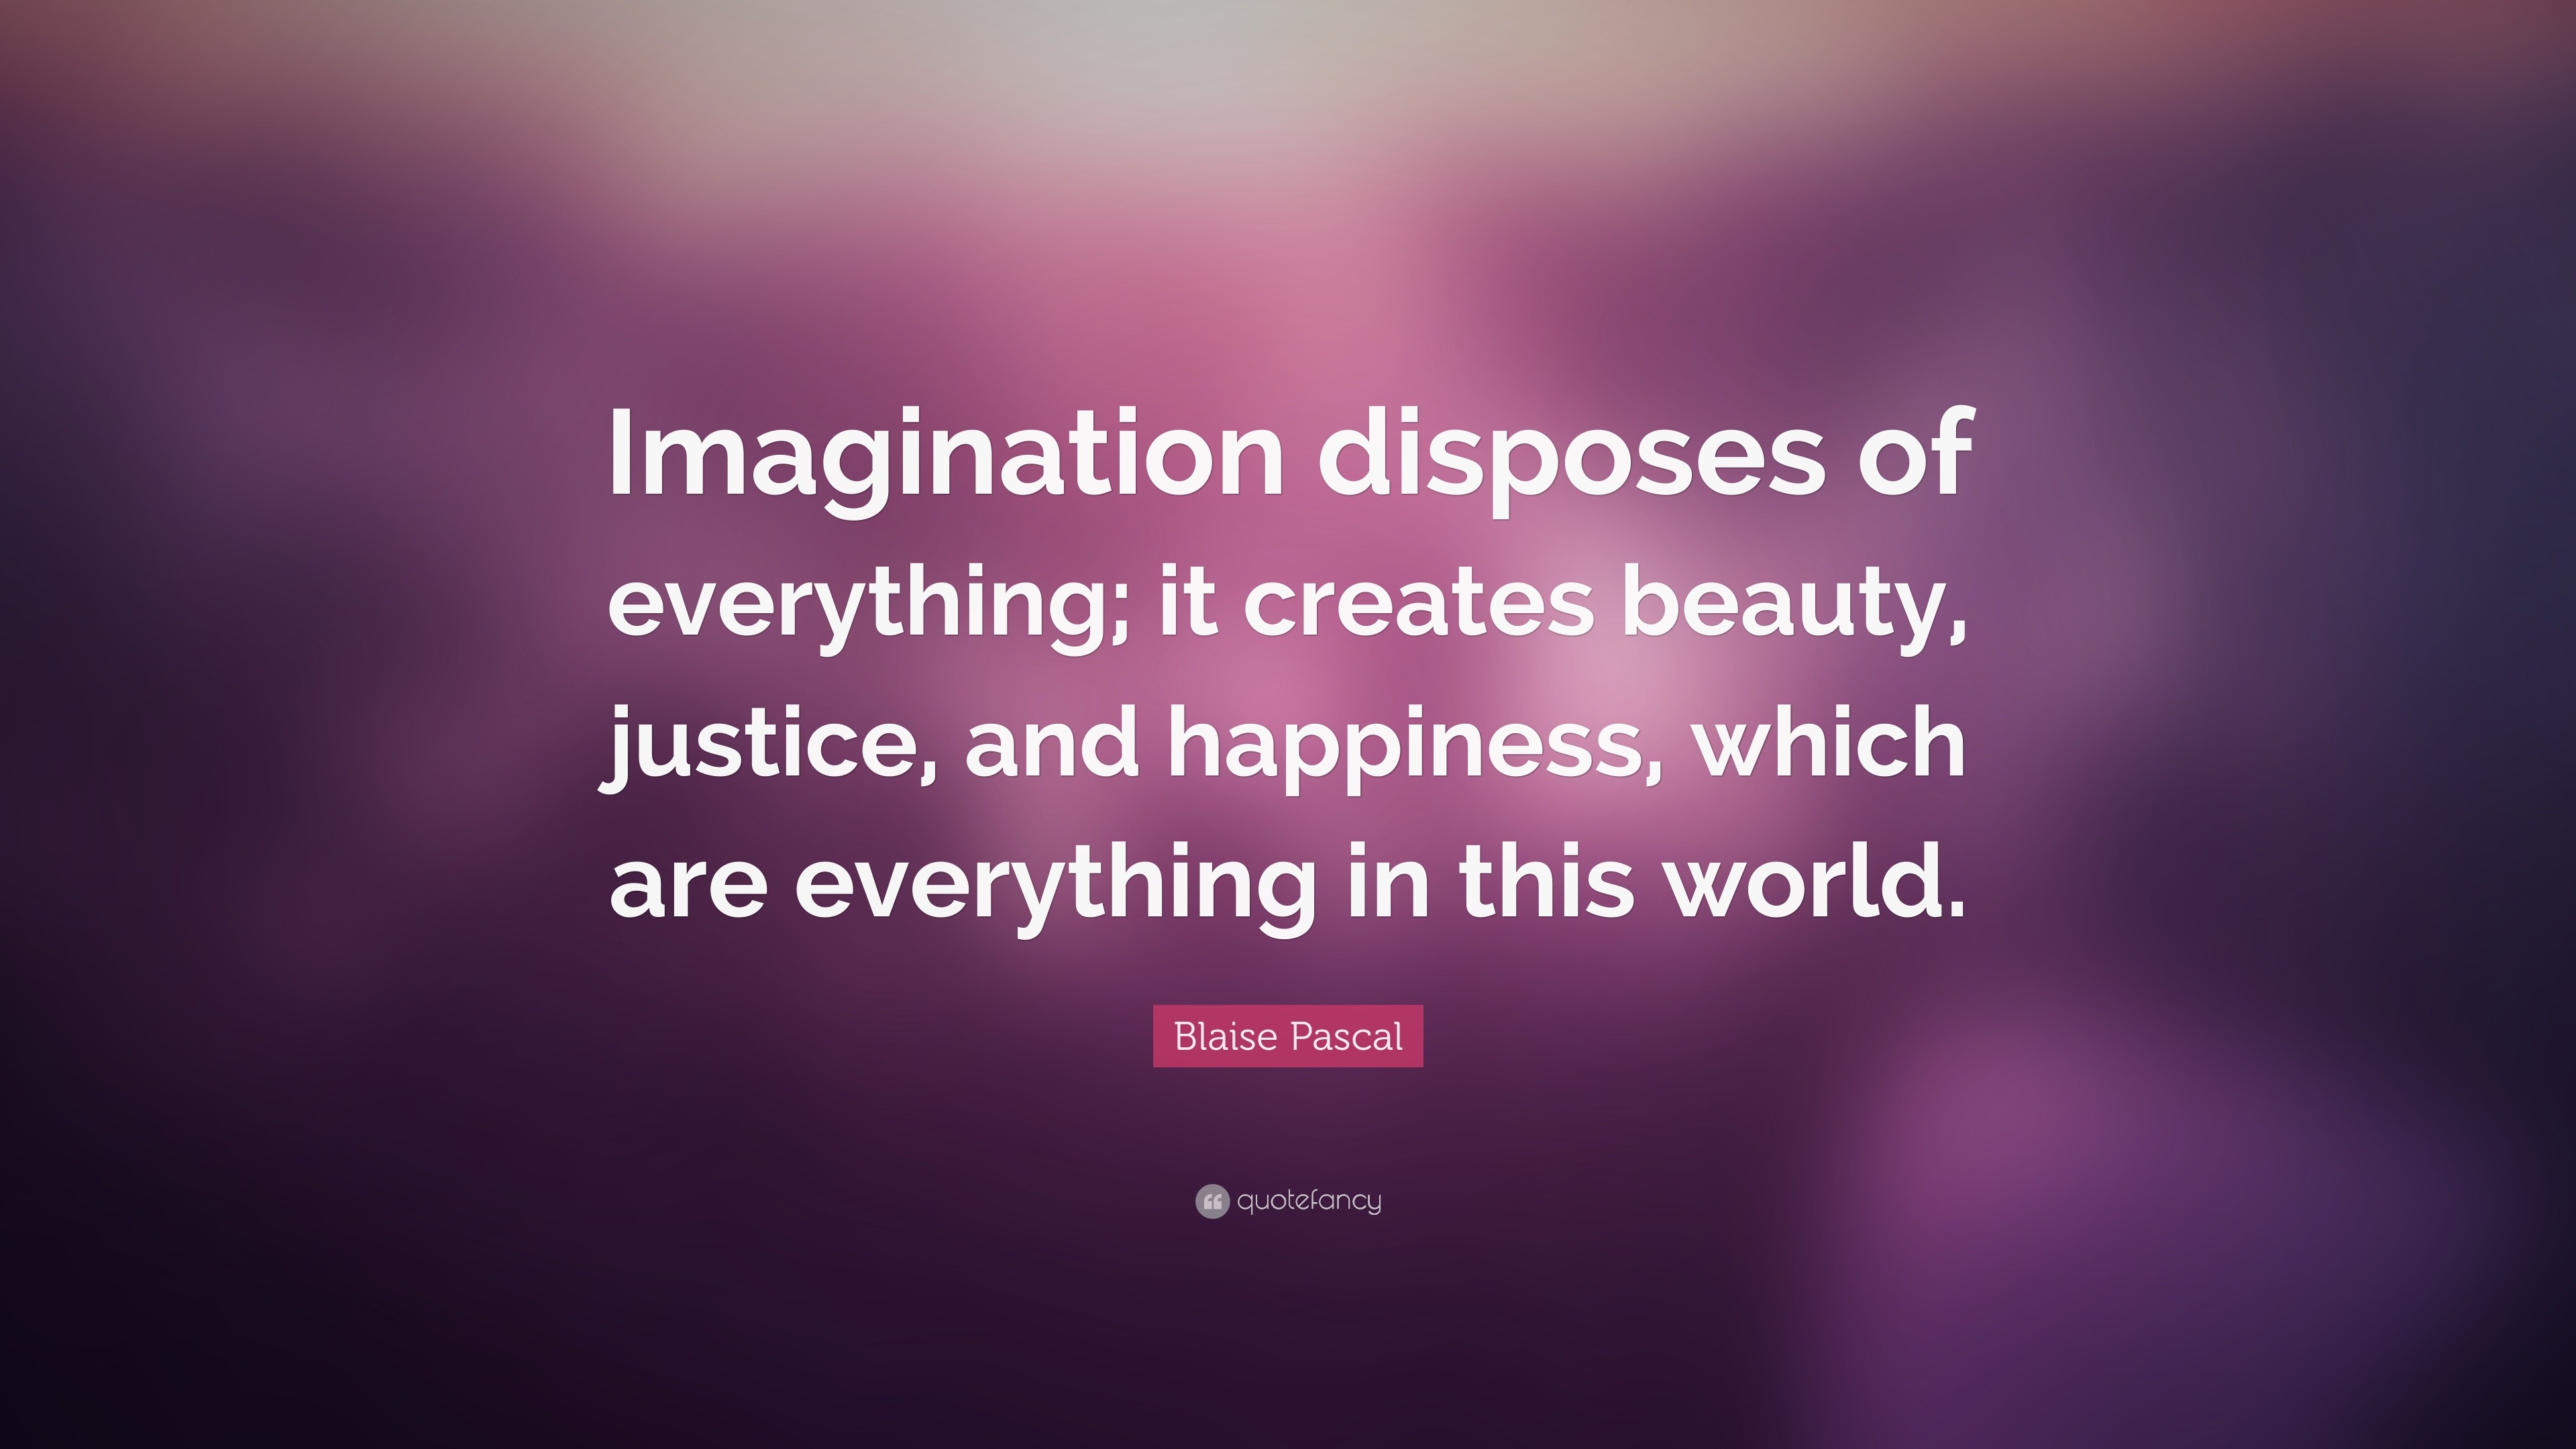 Blaise Pascal Quote: “Imagination disposes of everything; it creates ...